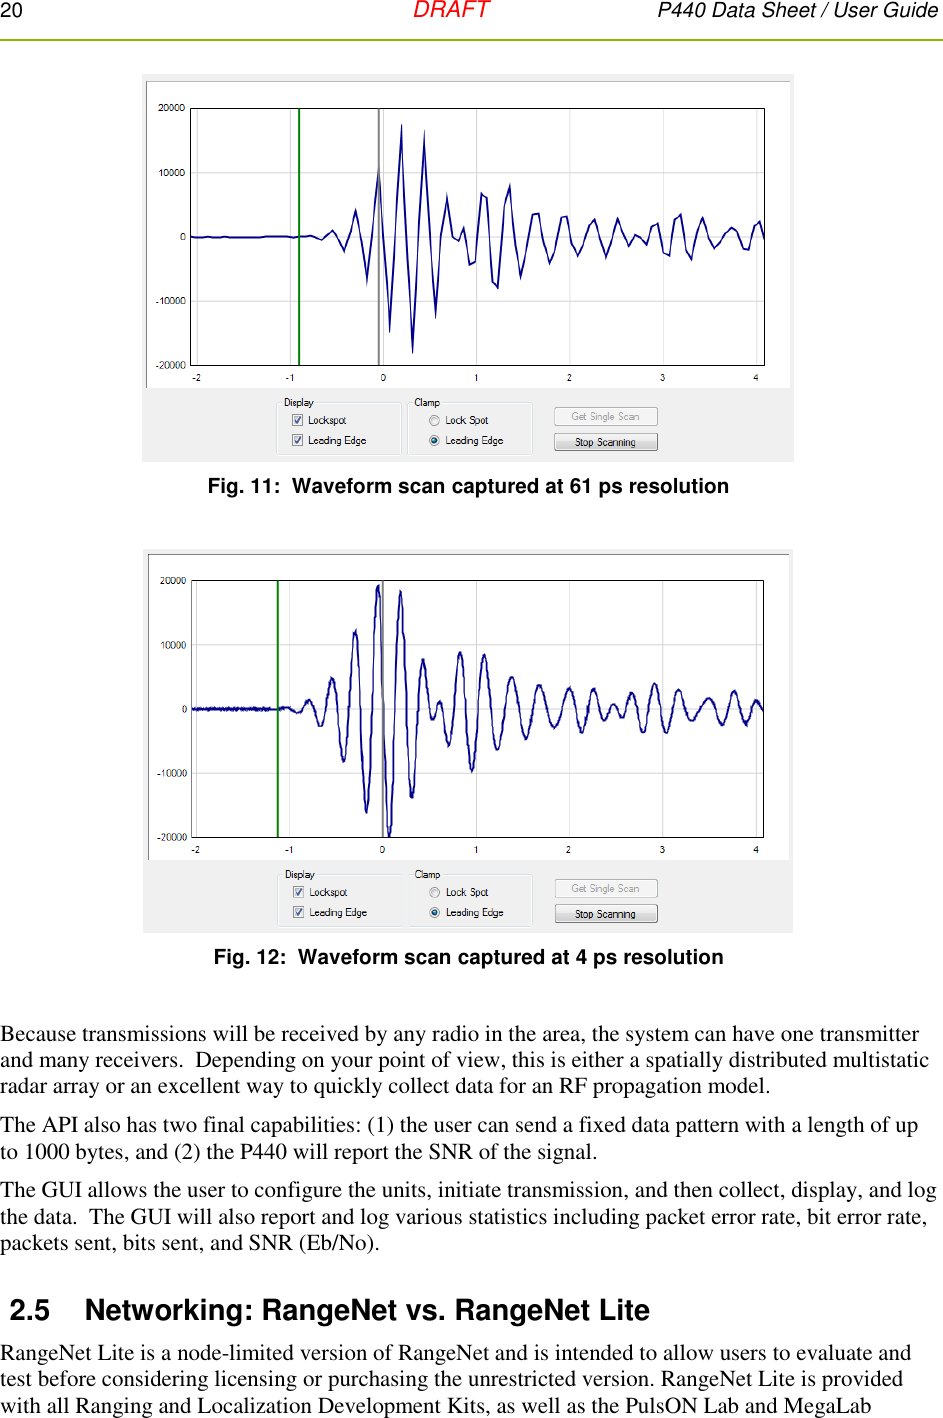 20   DRAFT P440 Data Sheet / User Guide    Fig. 11:  Waveform scan captured at 61 ps resolution    Fig. 12:  Waveform scan captured at 4 ps resolution  Because transmissions will be received by any radio in the area, the system can have one transmitter and many receivers.  Depending on your point of view, this is either a spatially distributed multistatic radar array or an excellent way to quickly collect data for an RF propagation model.  The API also has two final capabilities: (1) the user can send a fixed data pattern with a length of up to 1000 bytes, and (2) the P440 will report the SNR of the signal.   The GUI allows the user to configure the units, initiate transmission, and then collect, display, and log the data.  The GUI will also report and log various statistics including packet error rate, bit error rate, packets sent, bits sent, and SNR (Eb/No). 2.5  Networking: RangeNet vs. RangeNet Lite RangeNet Lite is a node-limited version of RangeNet and is intended to allow users to evaluate and test before considering licensing or purchasing the unrestricted version. RangeNet Lite is provided with all Ranging and Localization Development Kits, as well as the PulsON Lab and MegaLab 